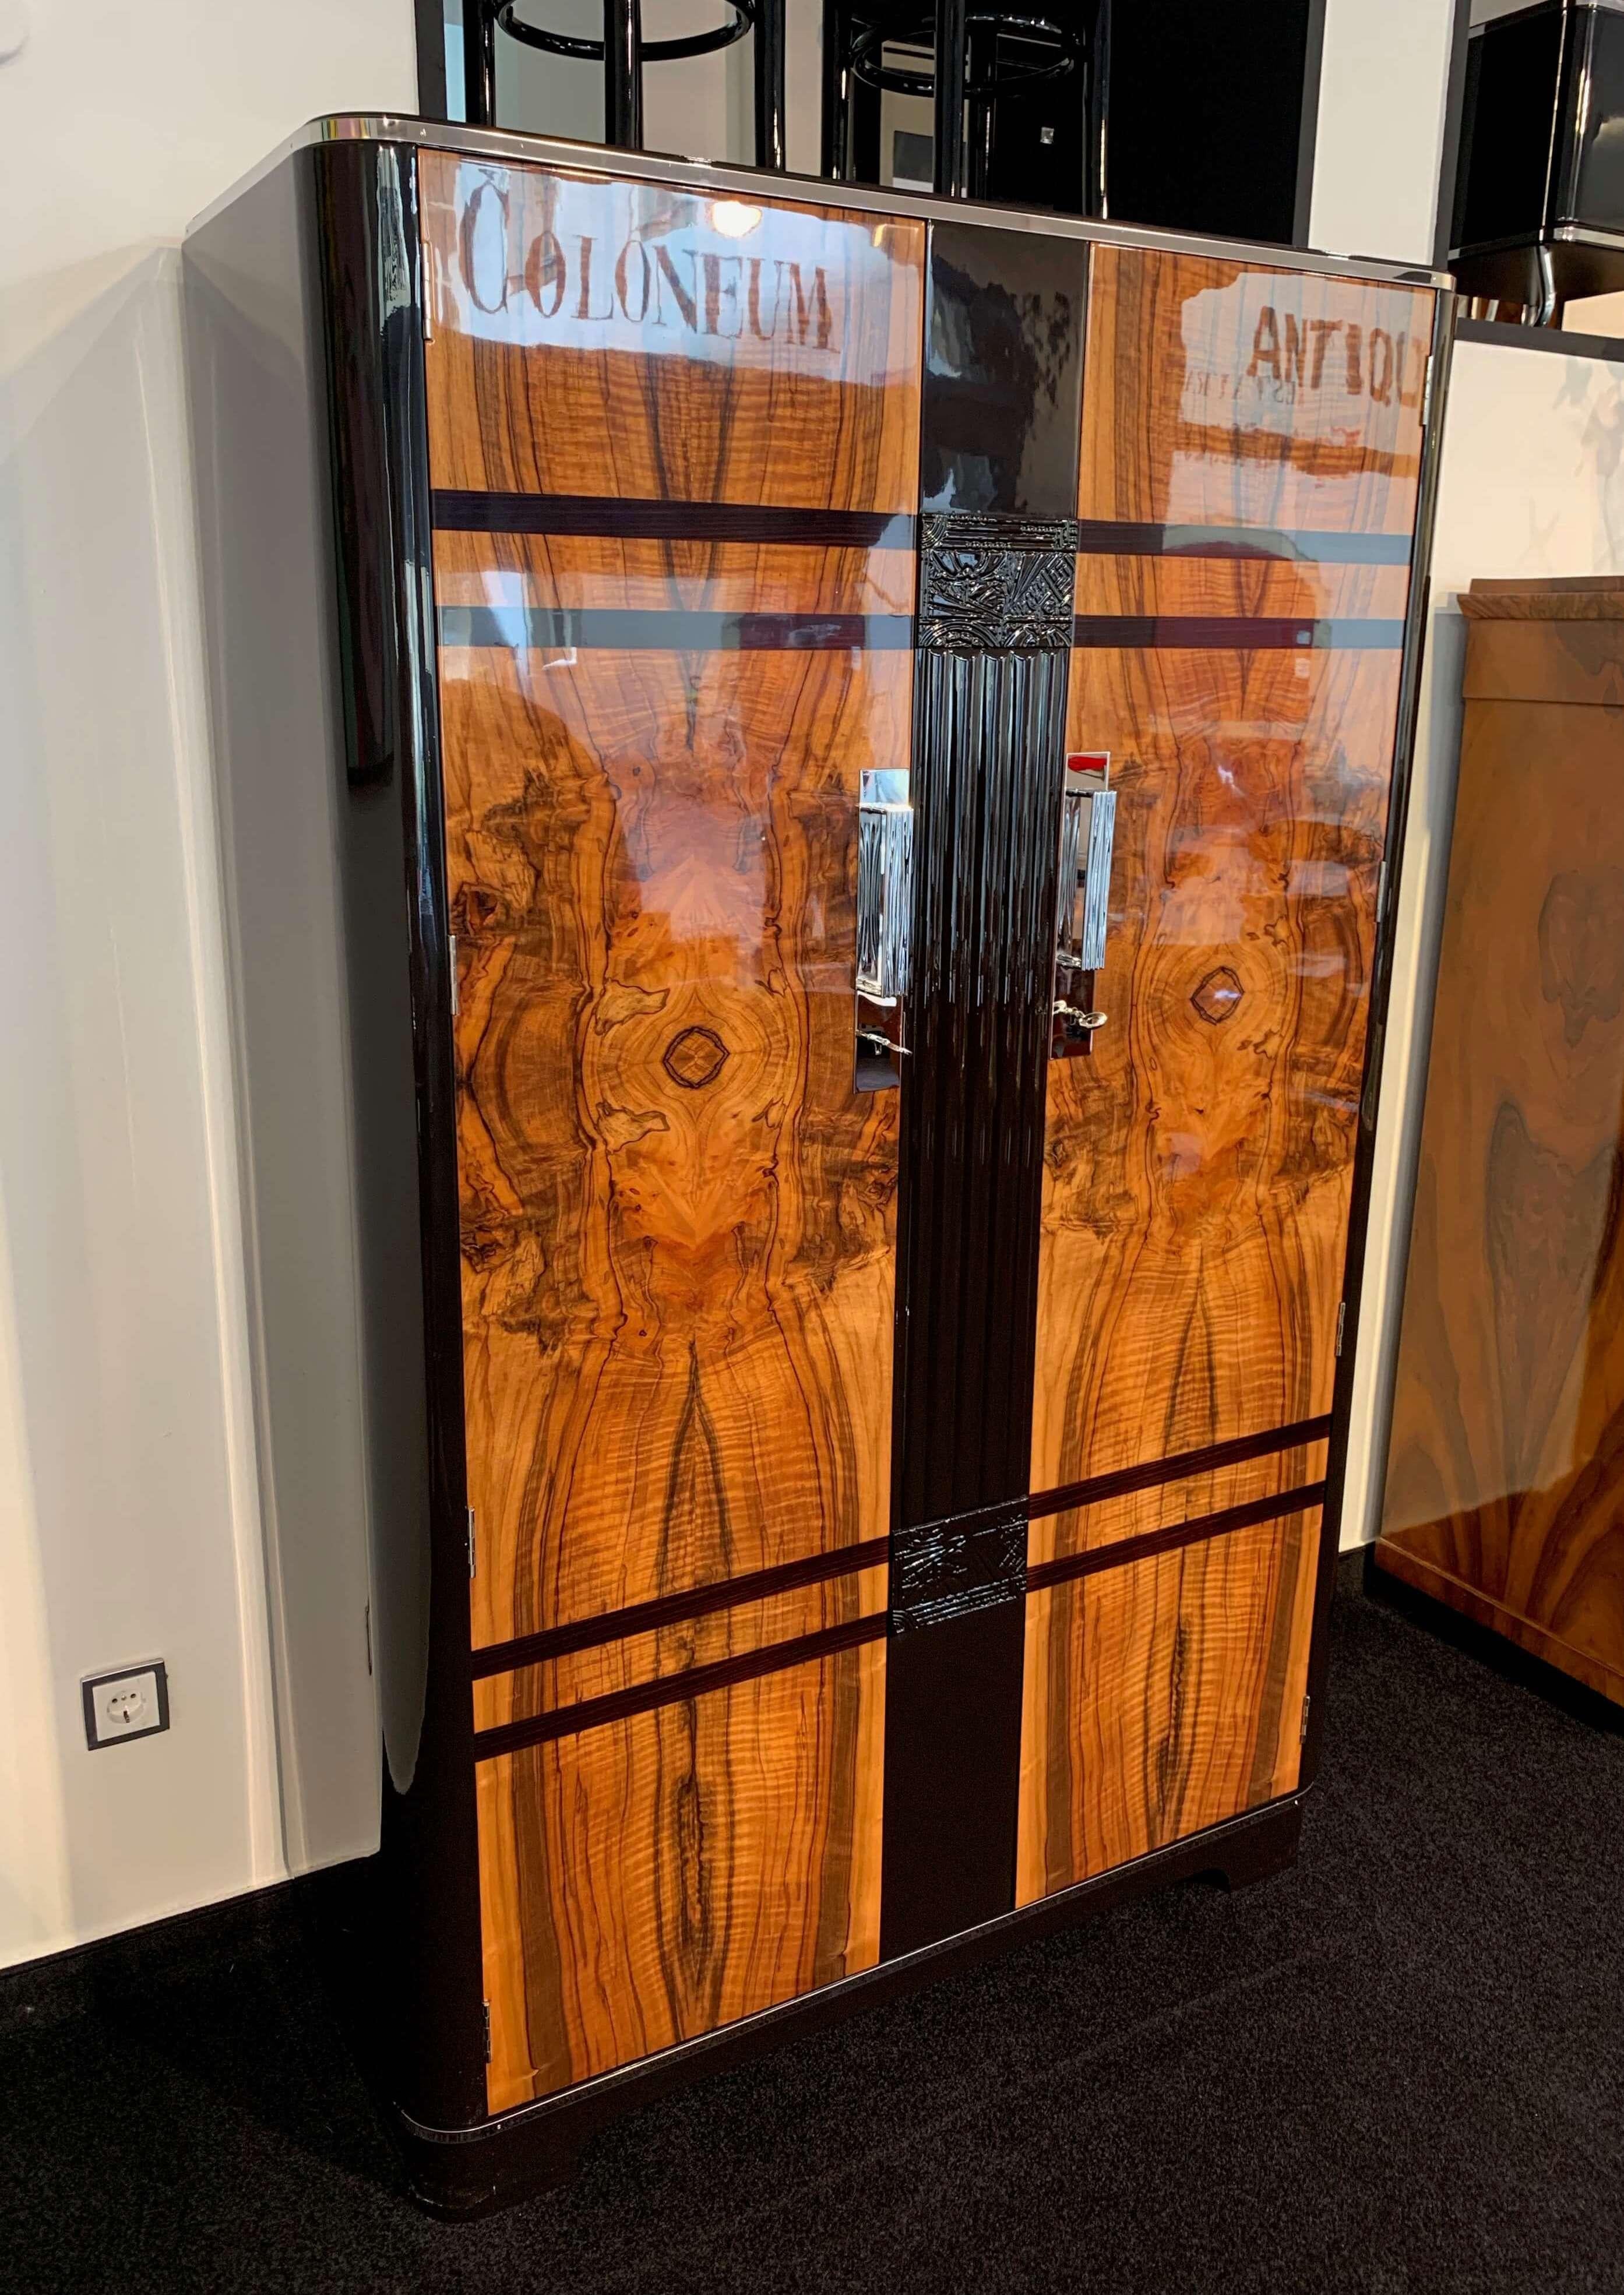 Wonderful Art Deco Wardrobe / Armoire / Dresser

Manufacturer: C.W.S. LTD. Cabinet Factory, London.
Nice Walnut Veneer and blackened Stripes Inlays at the front.
Great, elaborate Polyurethan Lacquer, high-gloss polished.
Sides and middle bar